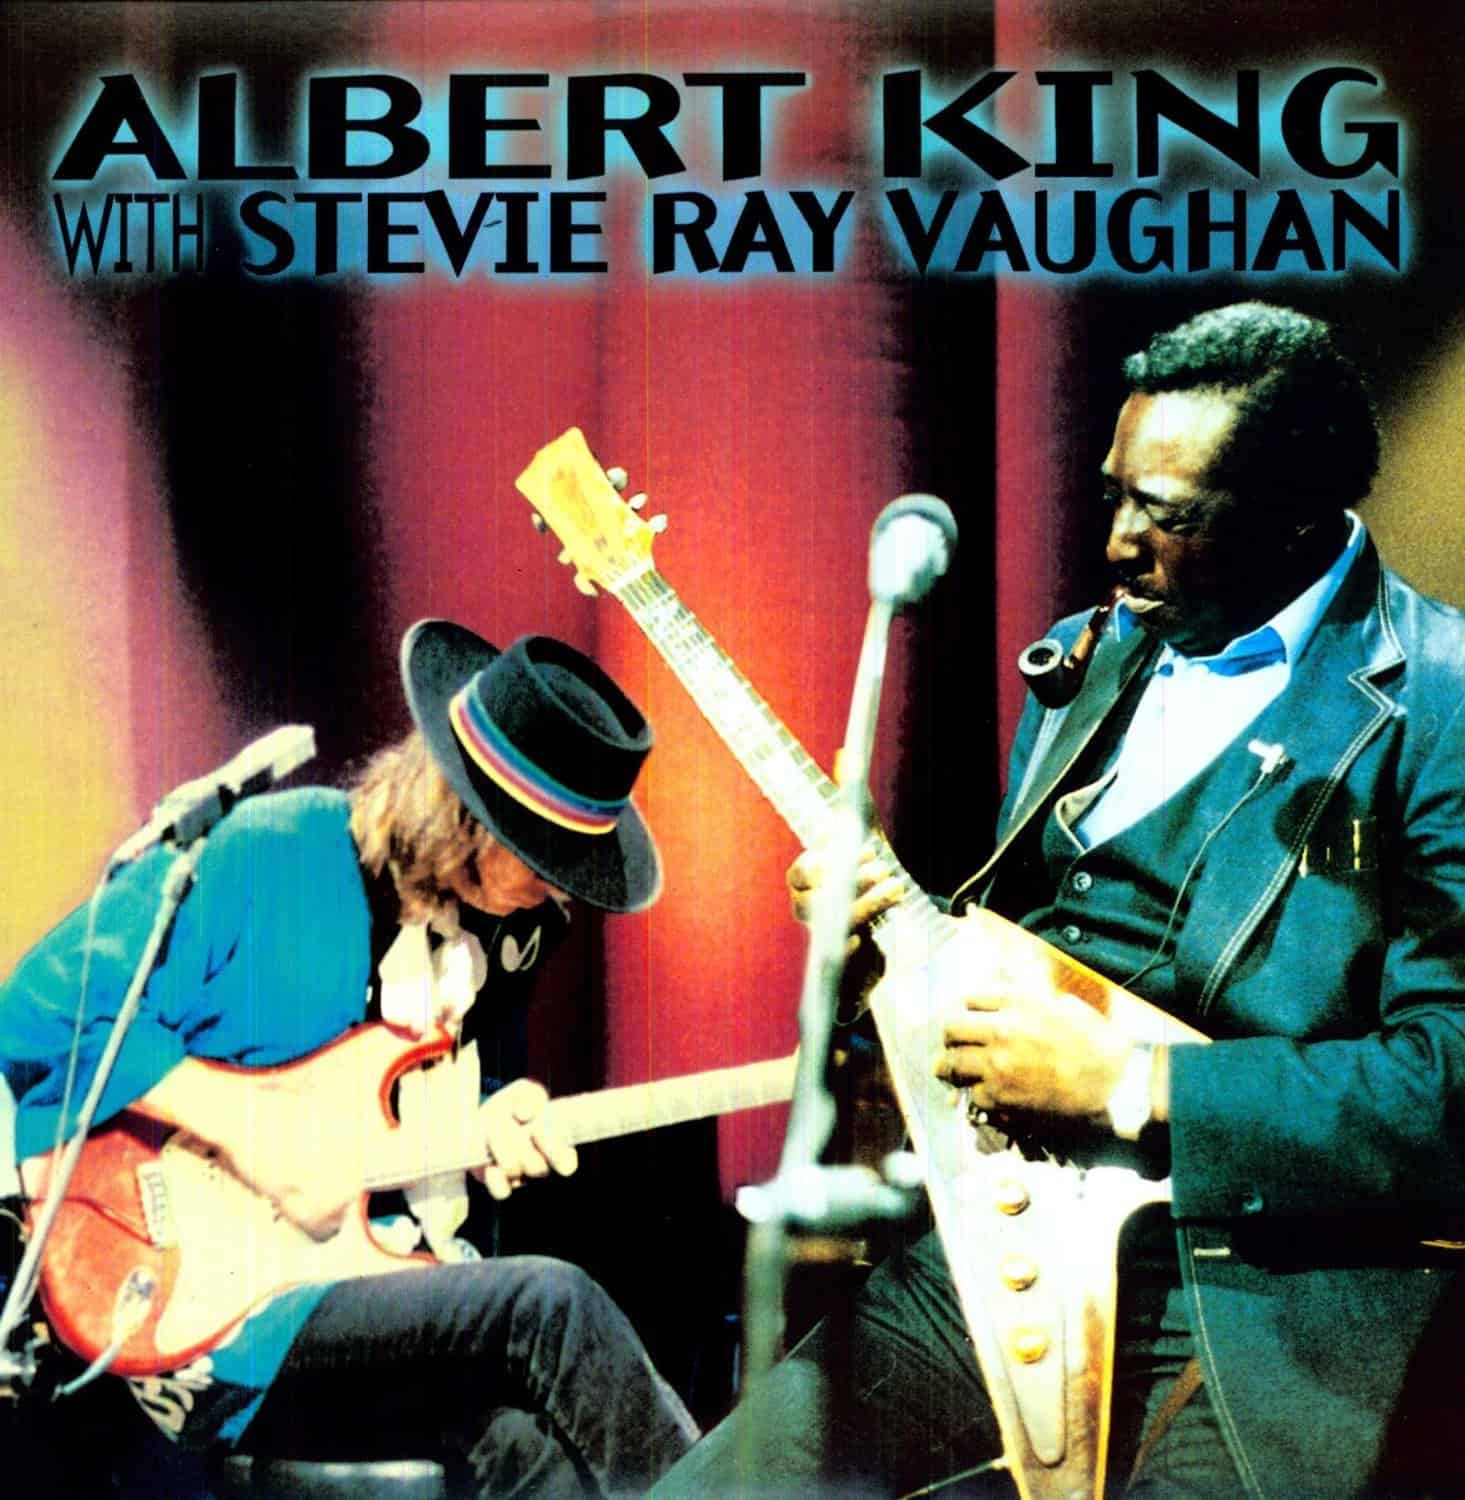 albert-king-with-stevie-ray-vaughan-in-session-vinyl-record-album-front